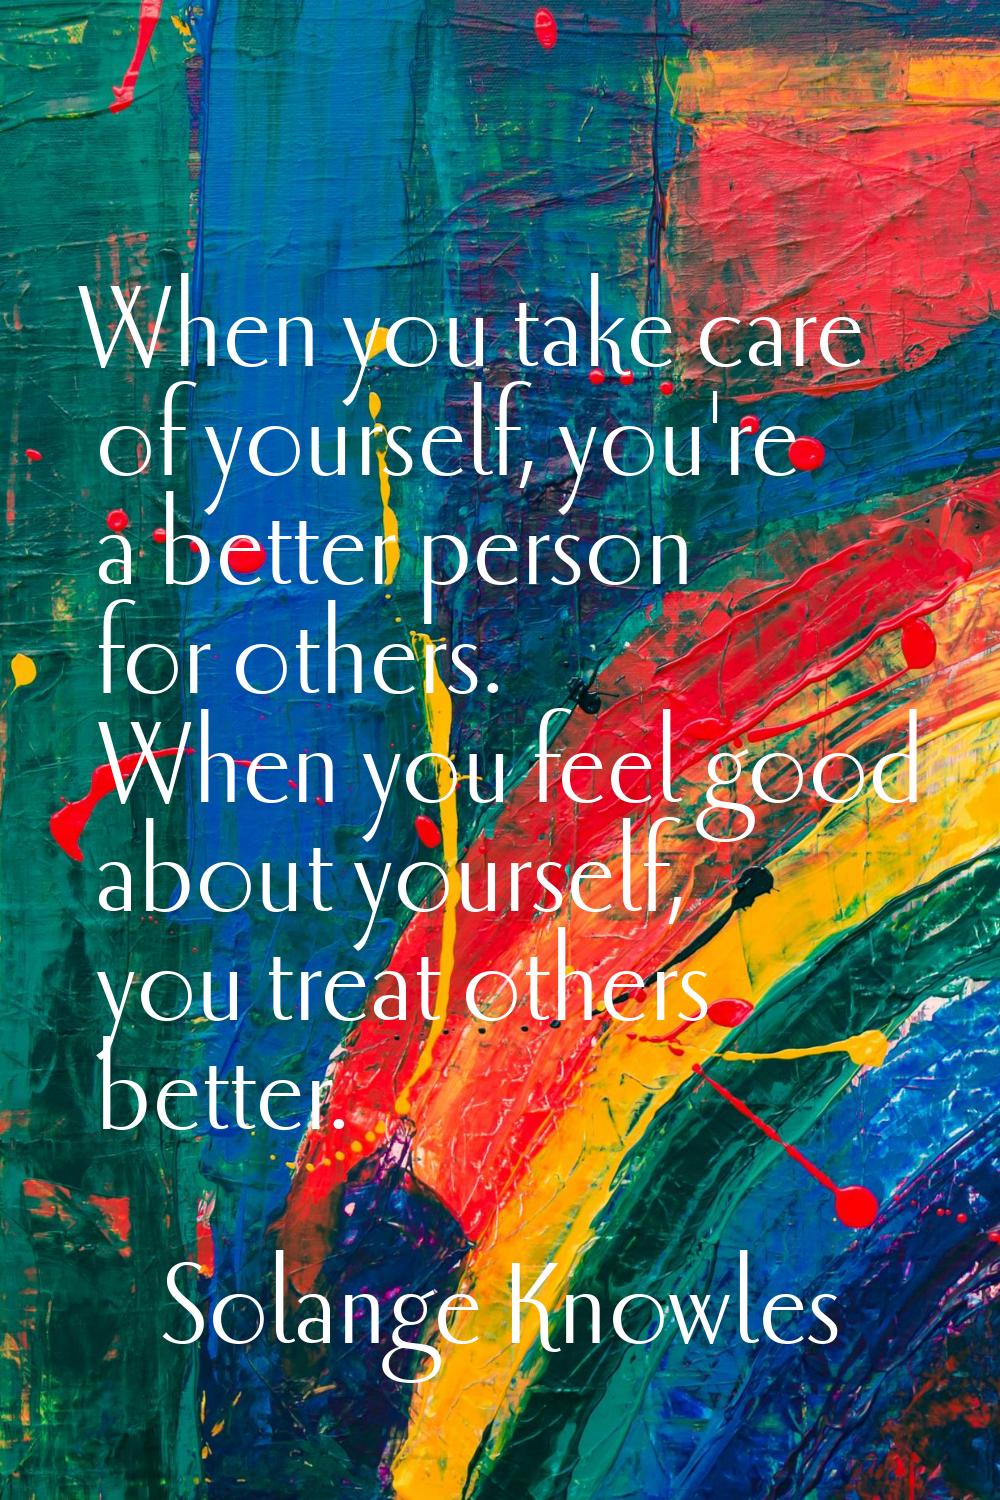 When you take care of yourself, you're a better person for others. When you feel good about yoursel